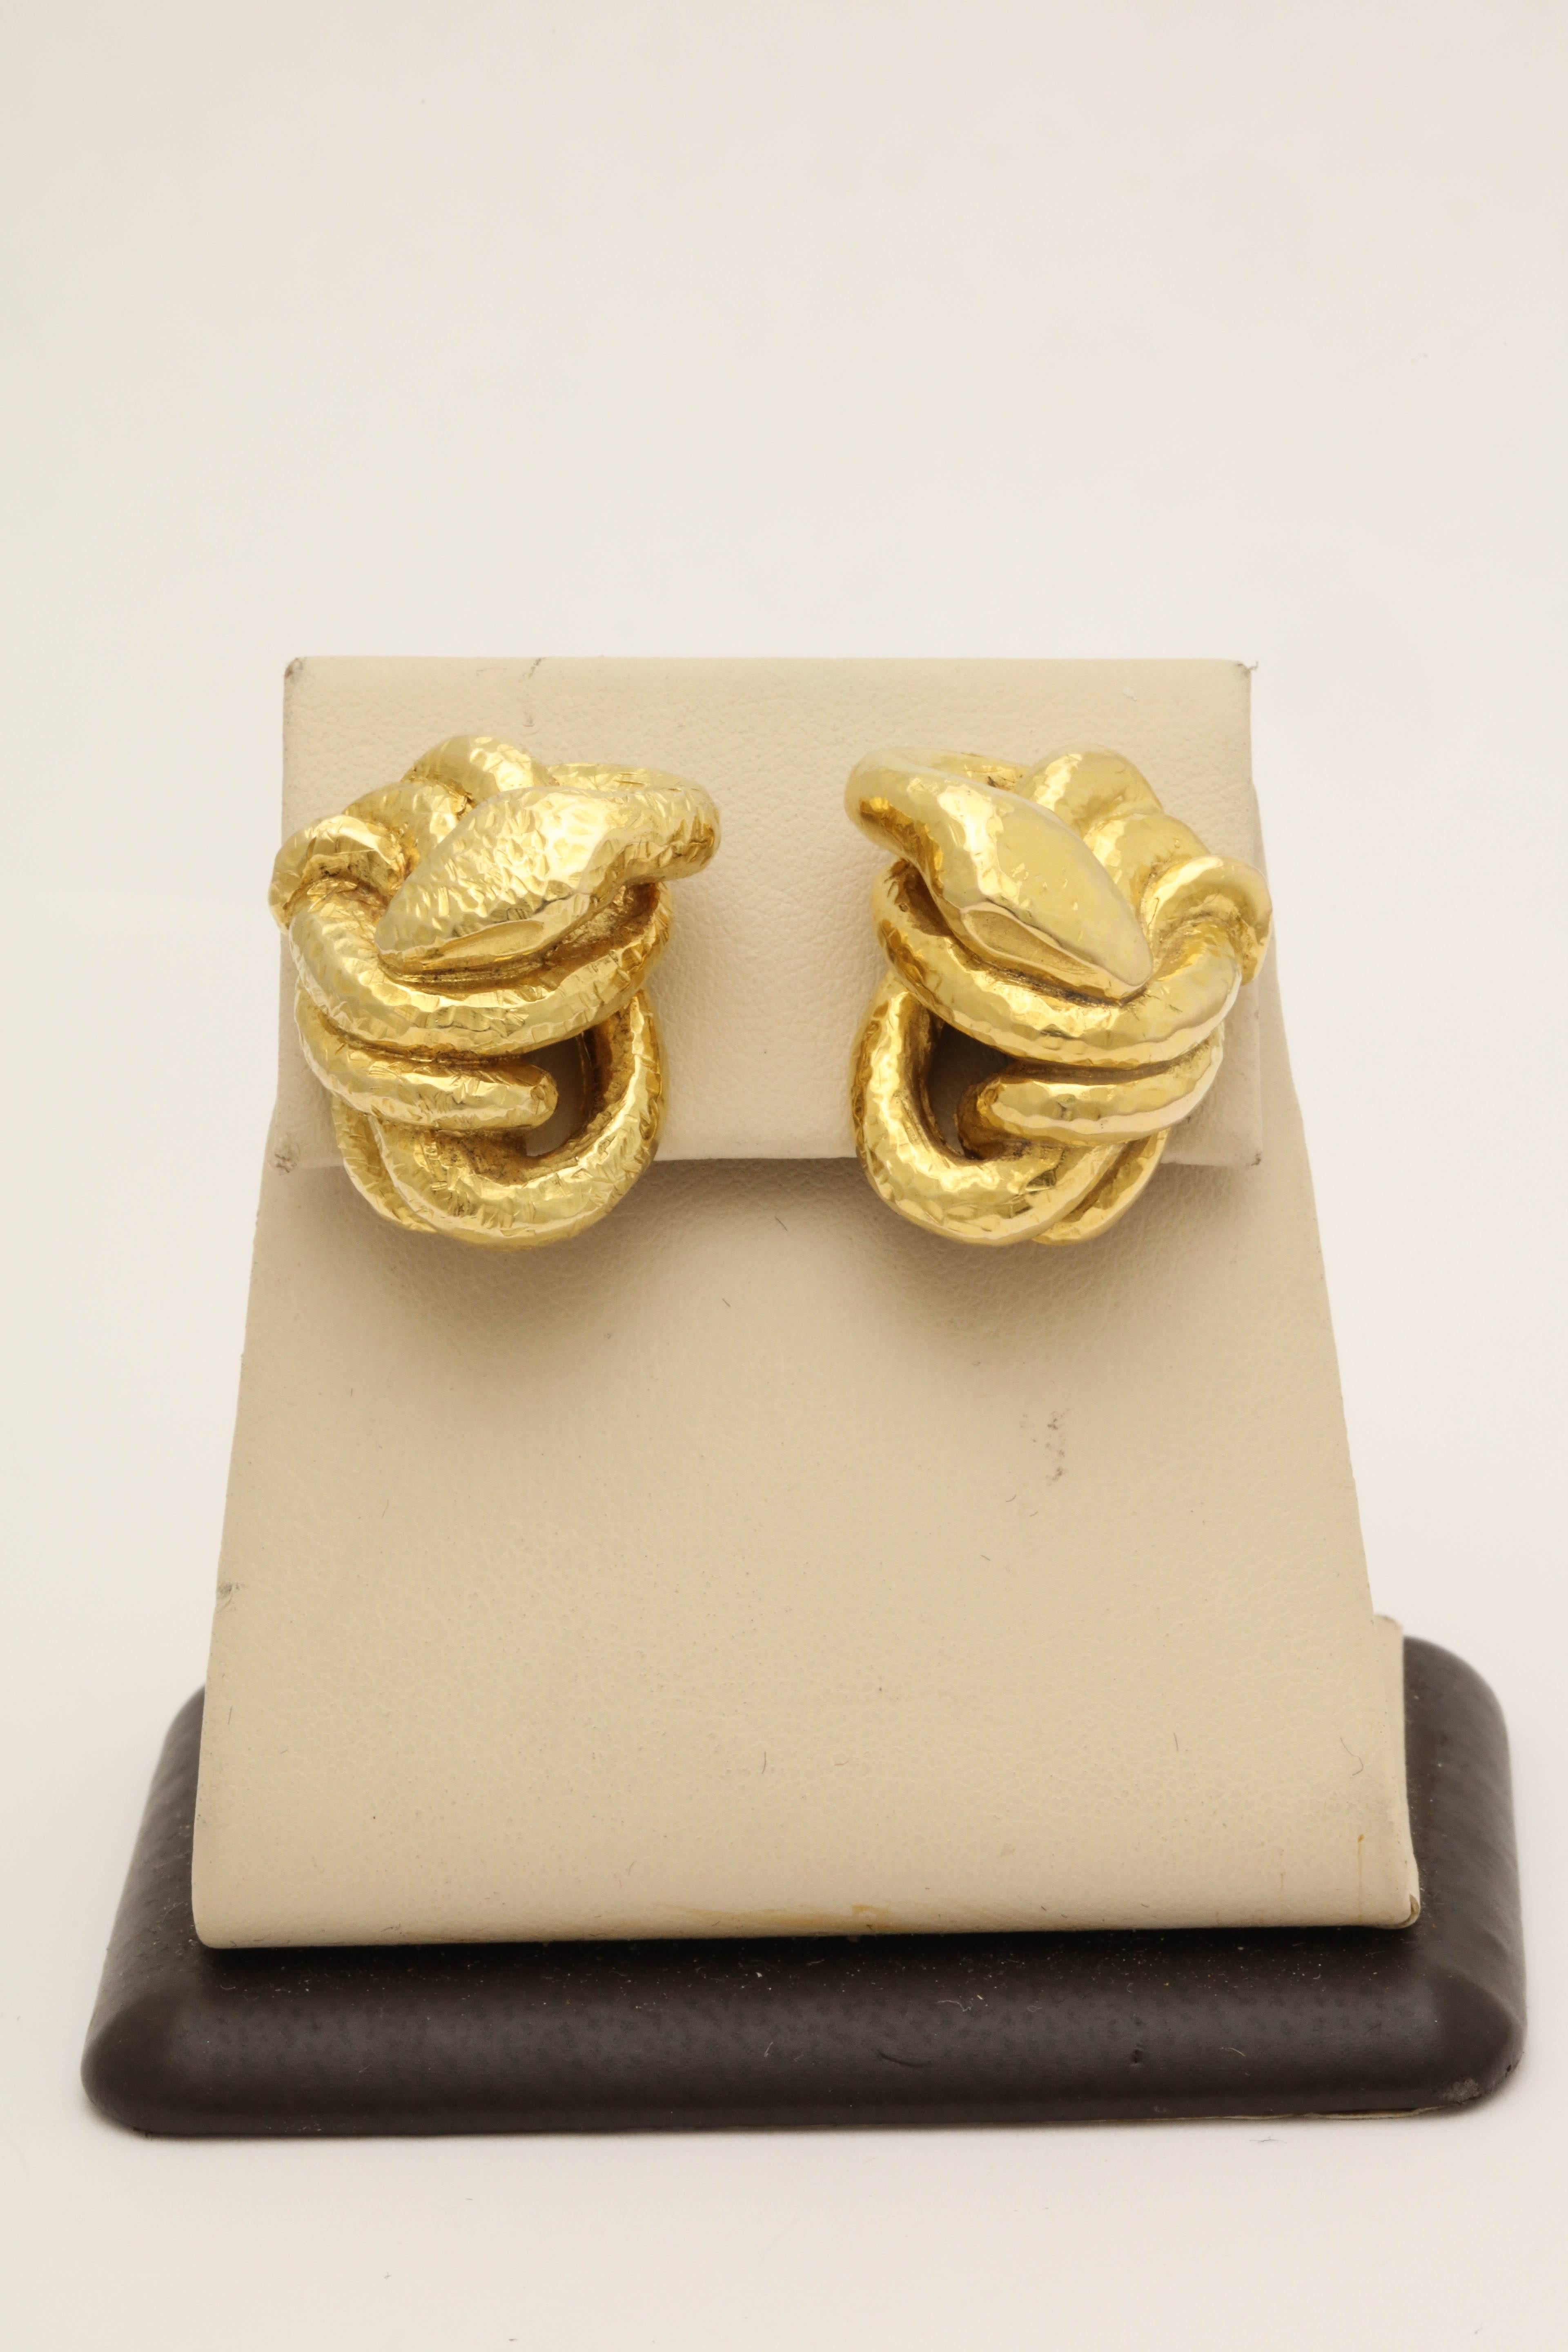 One Pair Of Ladies Figural Snake 18kt Yellow Gold Earrings Designed In A Wrapped Around Coil Serpent Design And Using A Hand Hammered Gold Craftmanship, These Earrings Are Very Special and Unique and Have High Quality Fancy Heavy Clip On Backs.